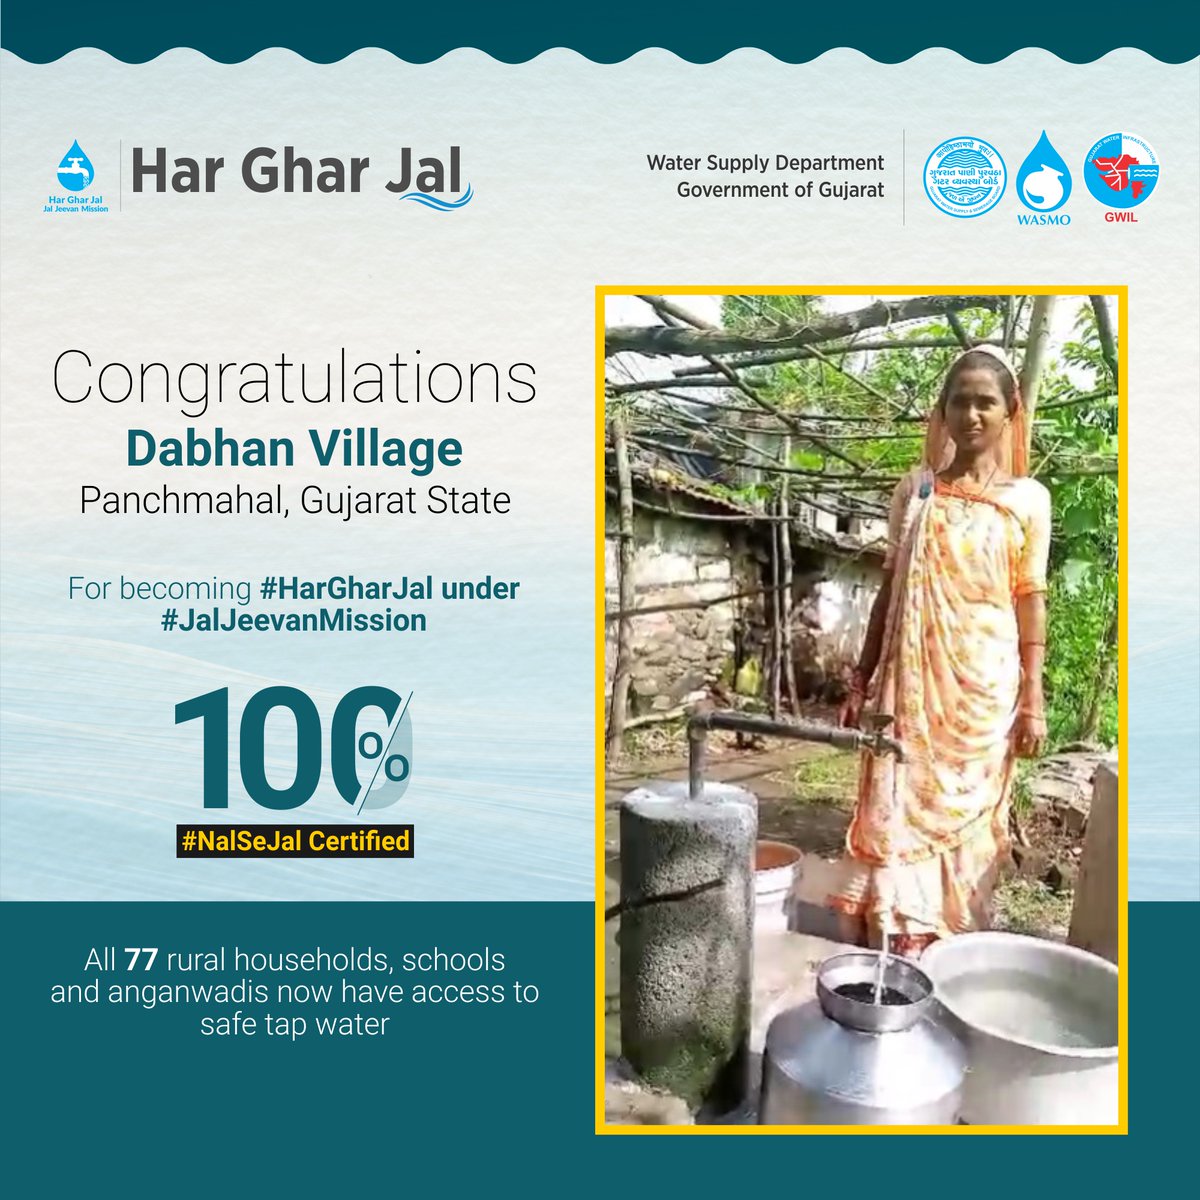 Congratulations to all the people of Dabhan Village of #Panchmahal, #Gujarat State, for becoming 100% #HarGharNalSeJal certified. All 77 rural households, schools and anganwadis are now getting safe tap water under #JalJeevanMission